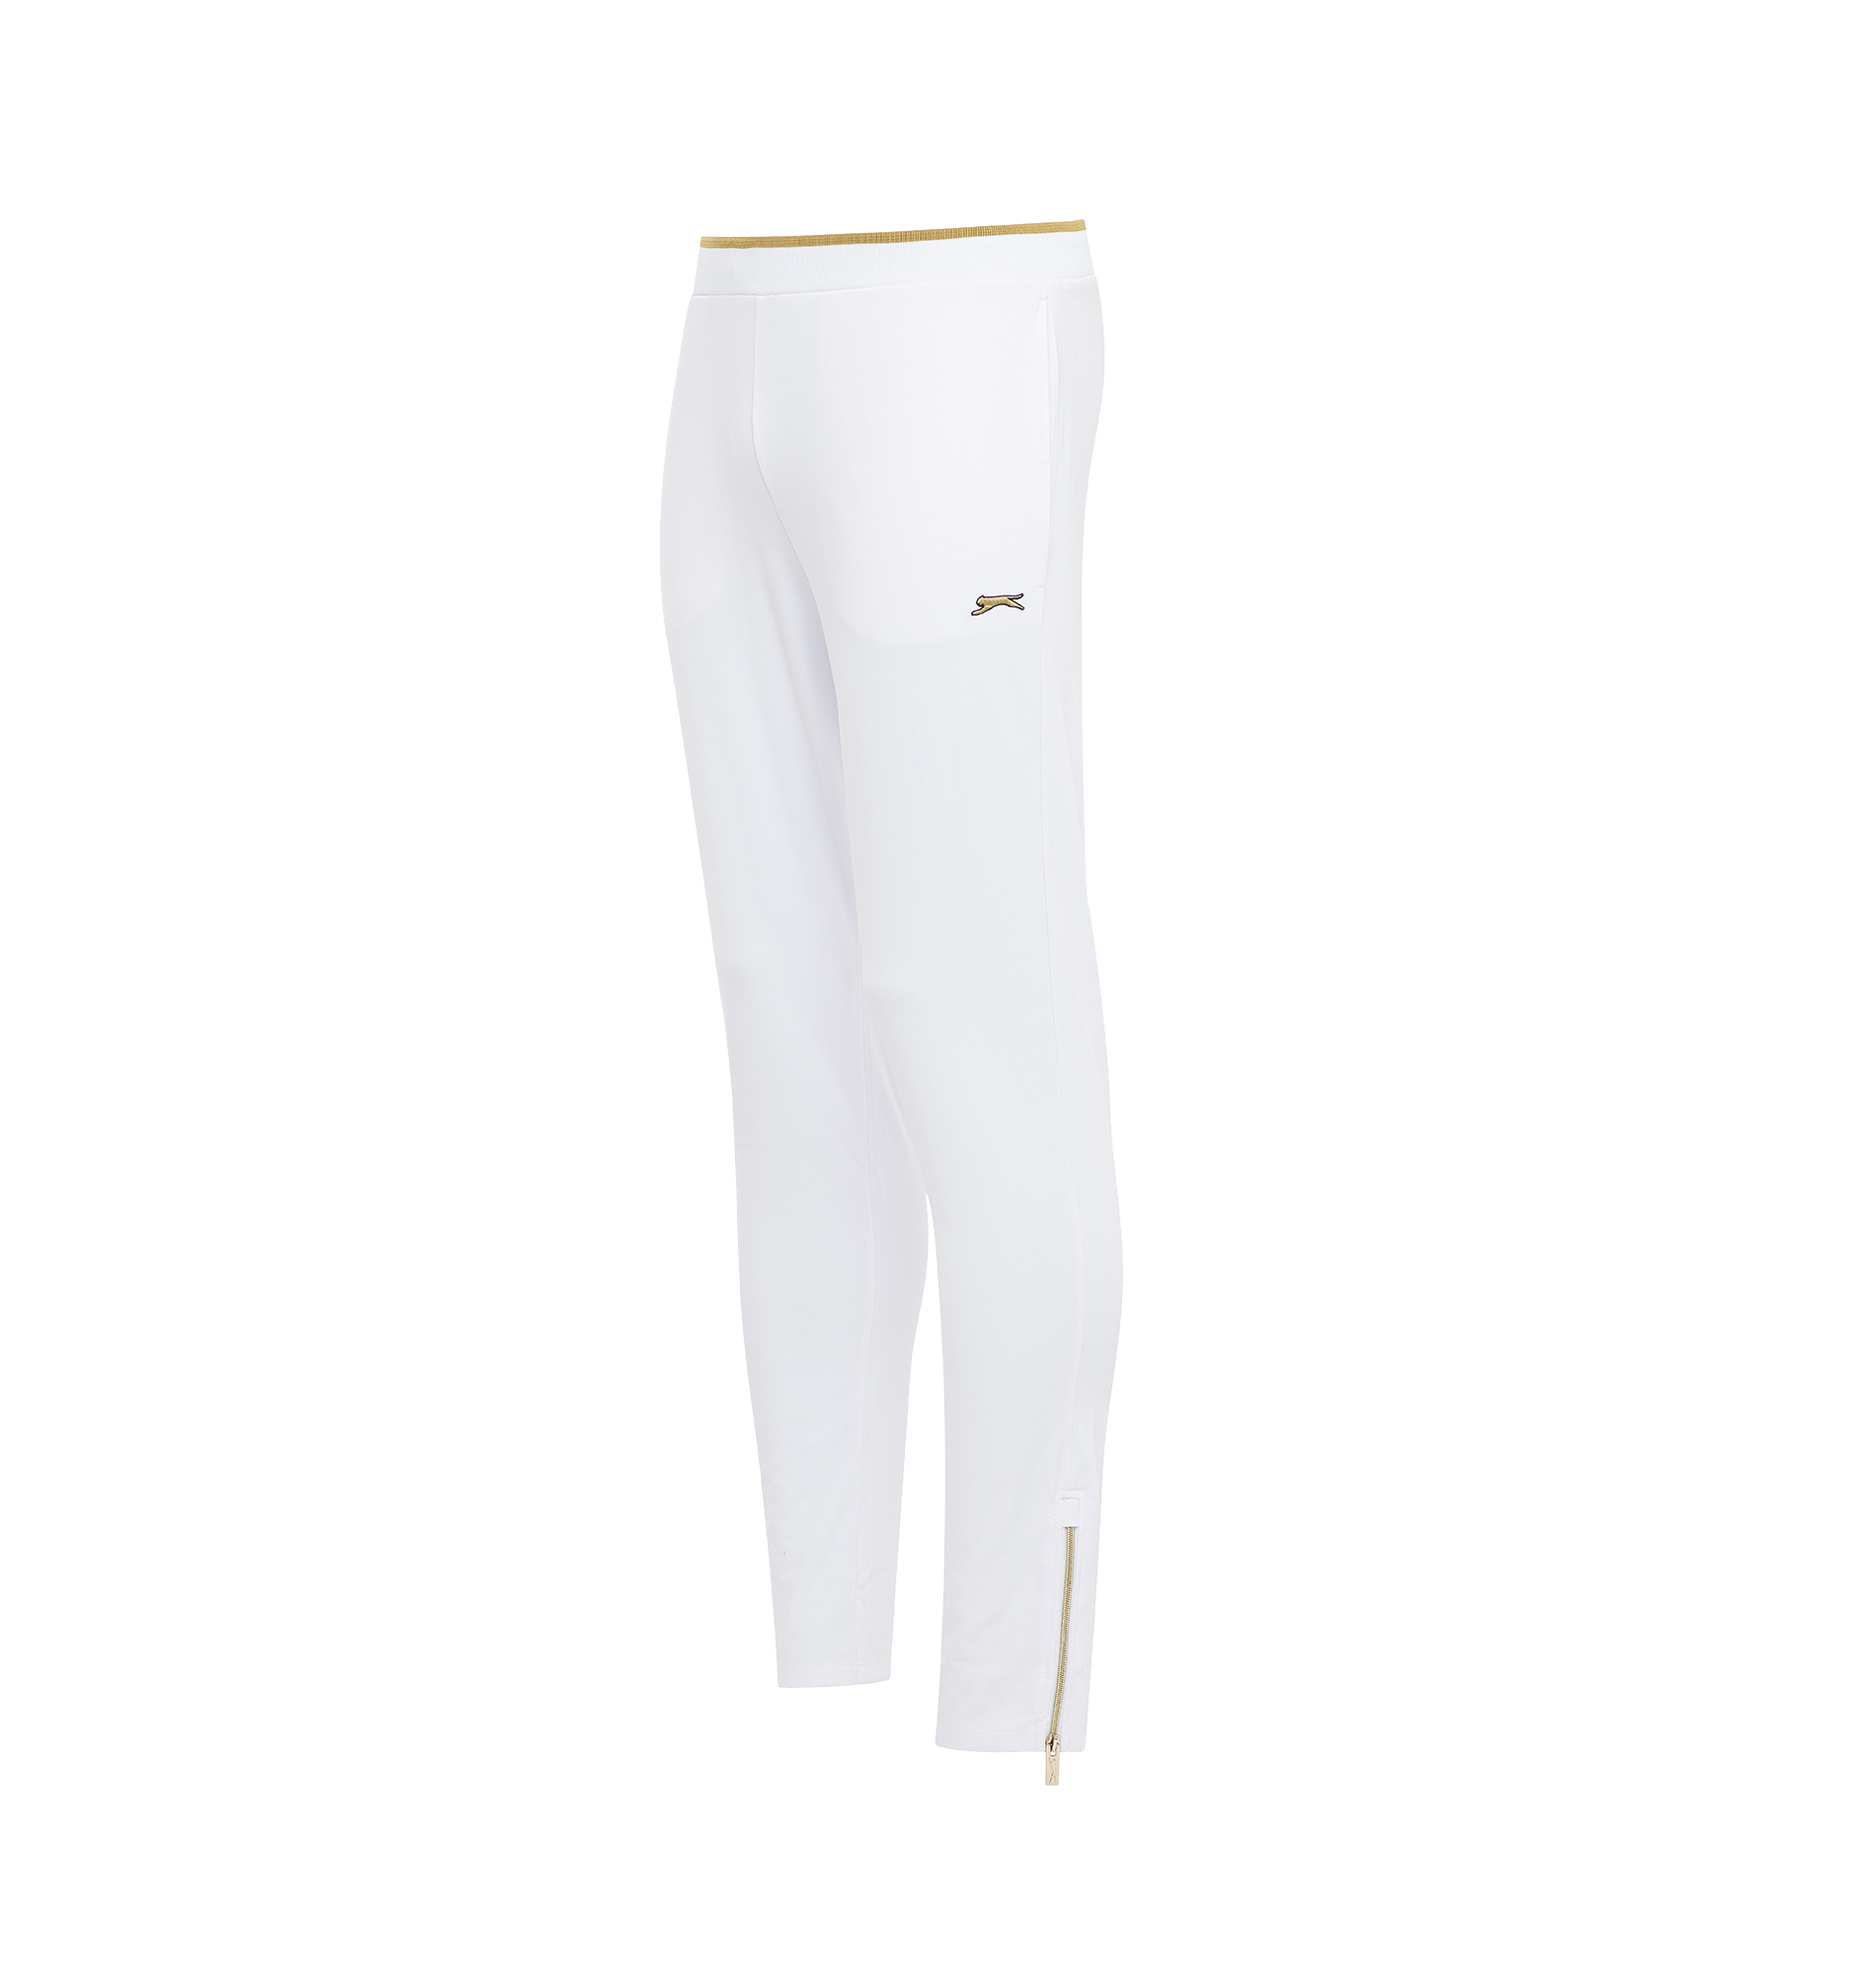 DIEGO TRACK PANT - EMERSON WHITE